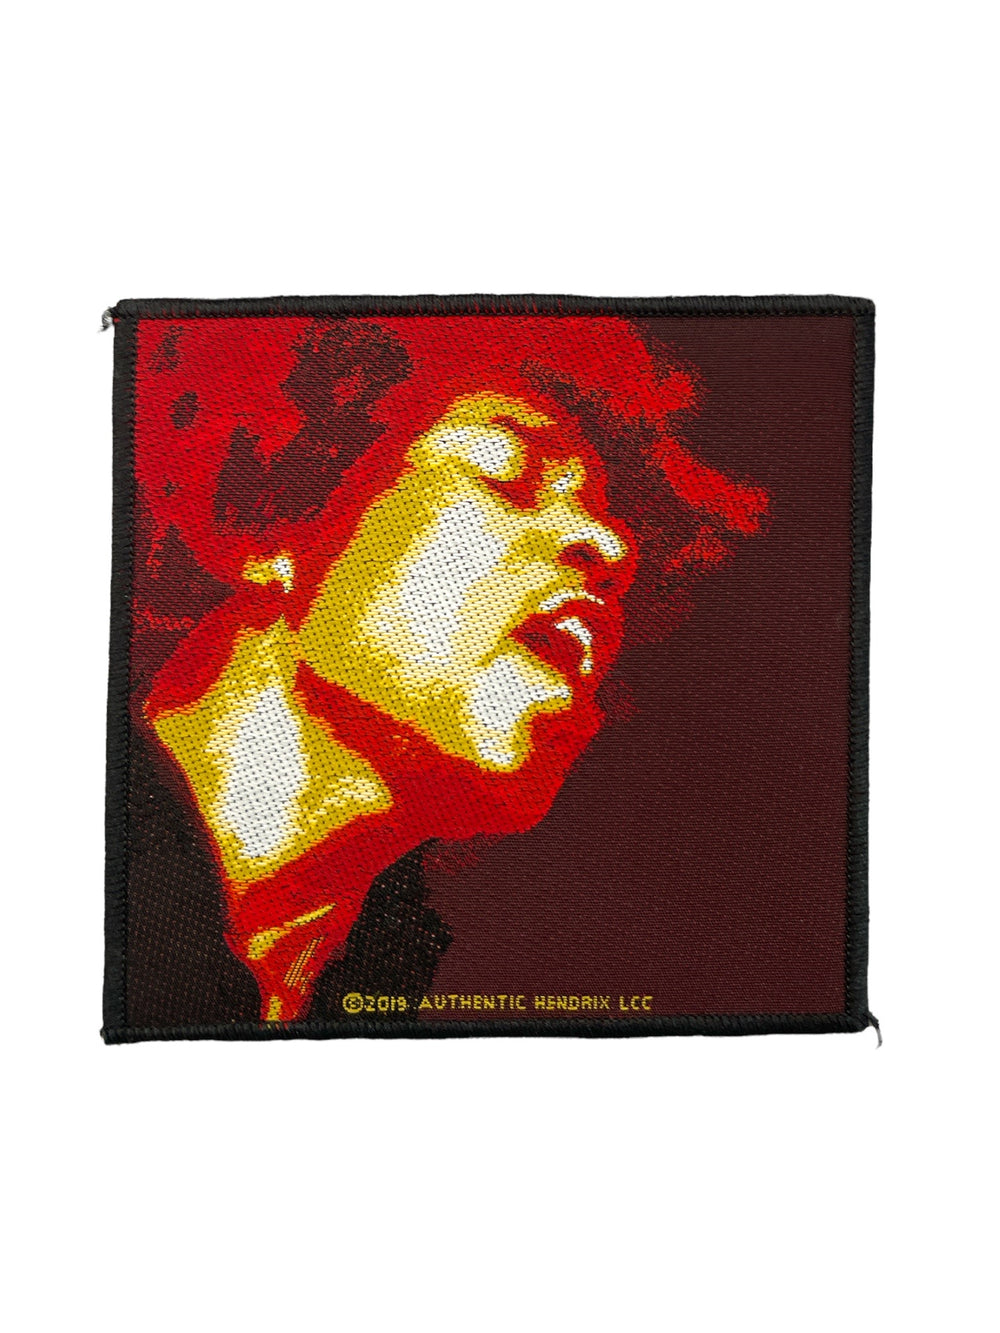 Jimi Hendrix Electric Ladyland Official Woven Patch Brand New